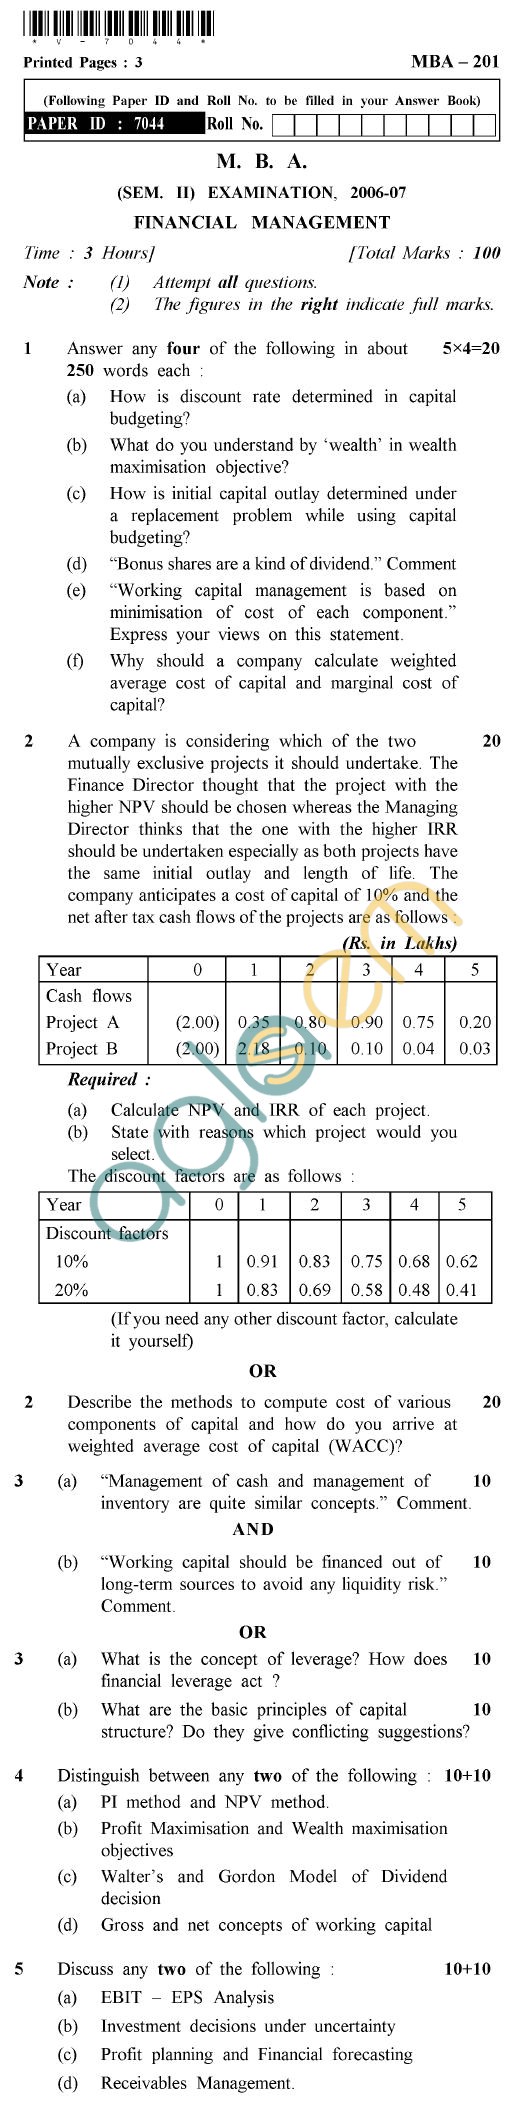 UPTU  MBA Question Papers - MBA-201-Financial Management